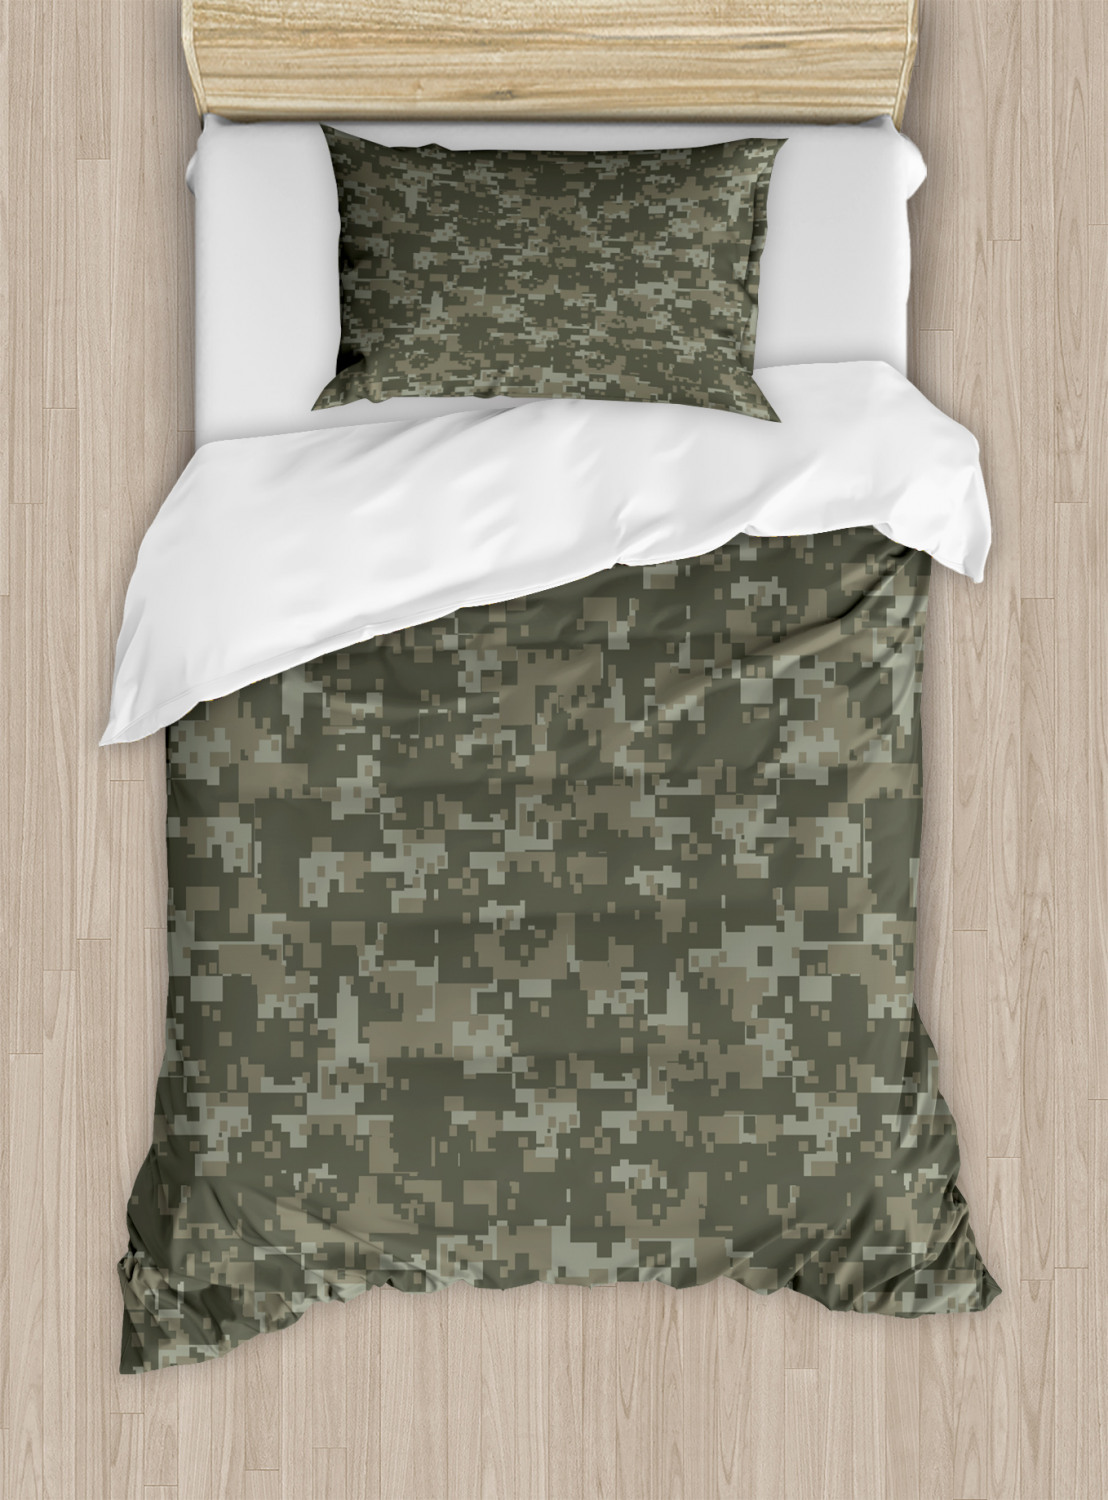 Camouflage Duvet Cover Set Twin Queen King Sizes With Pillow Shams